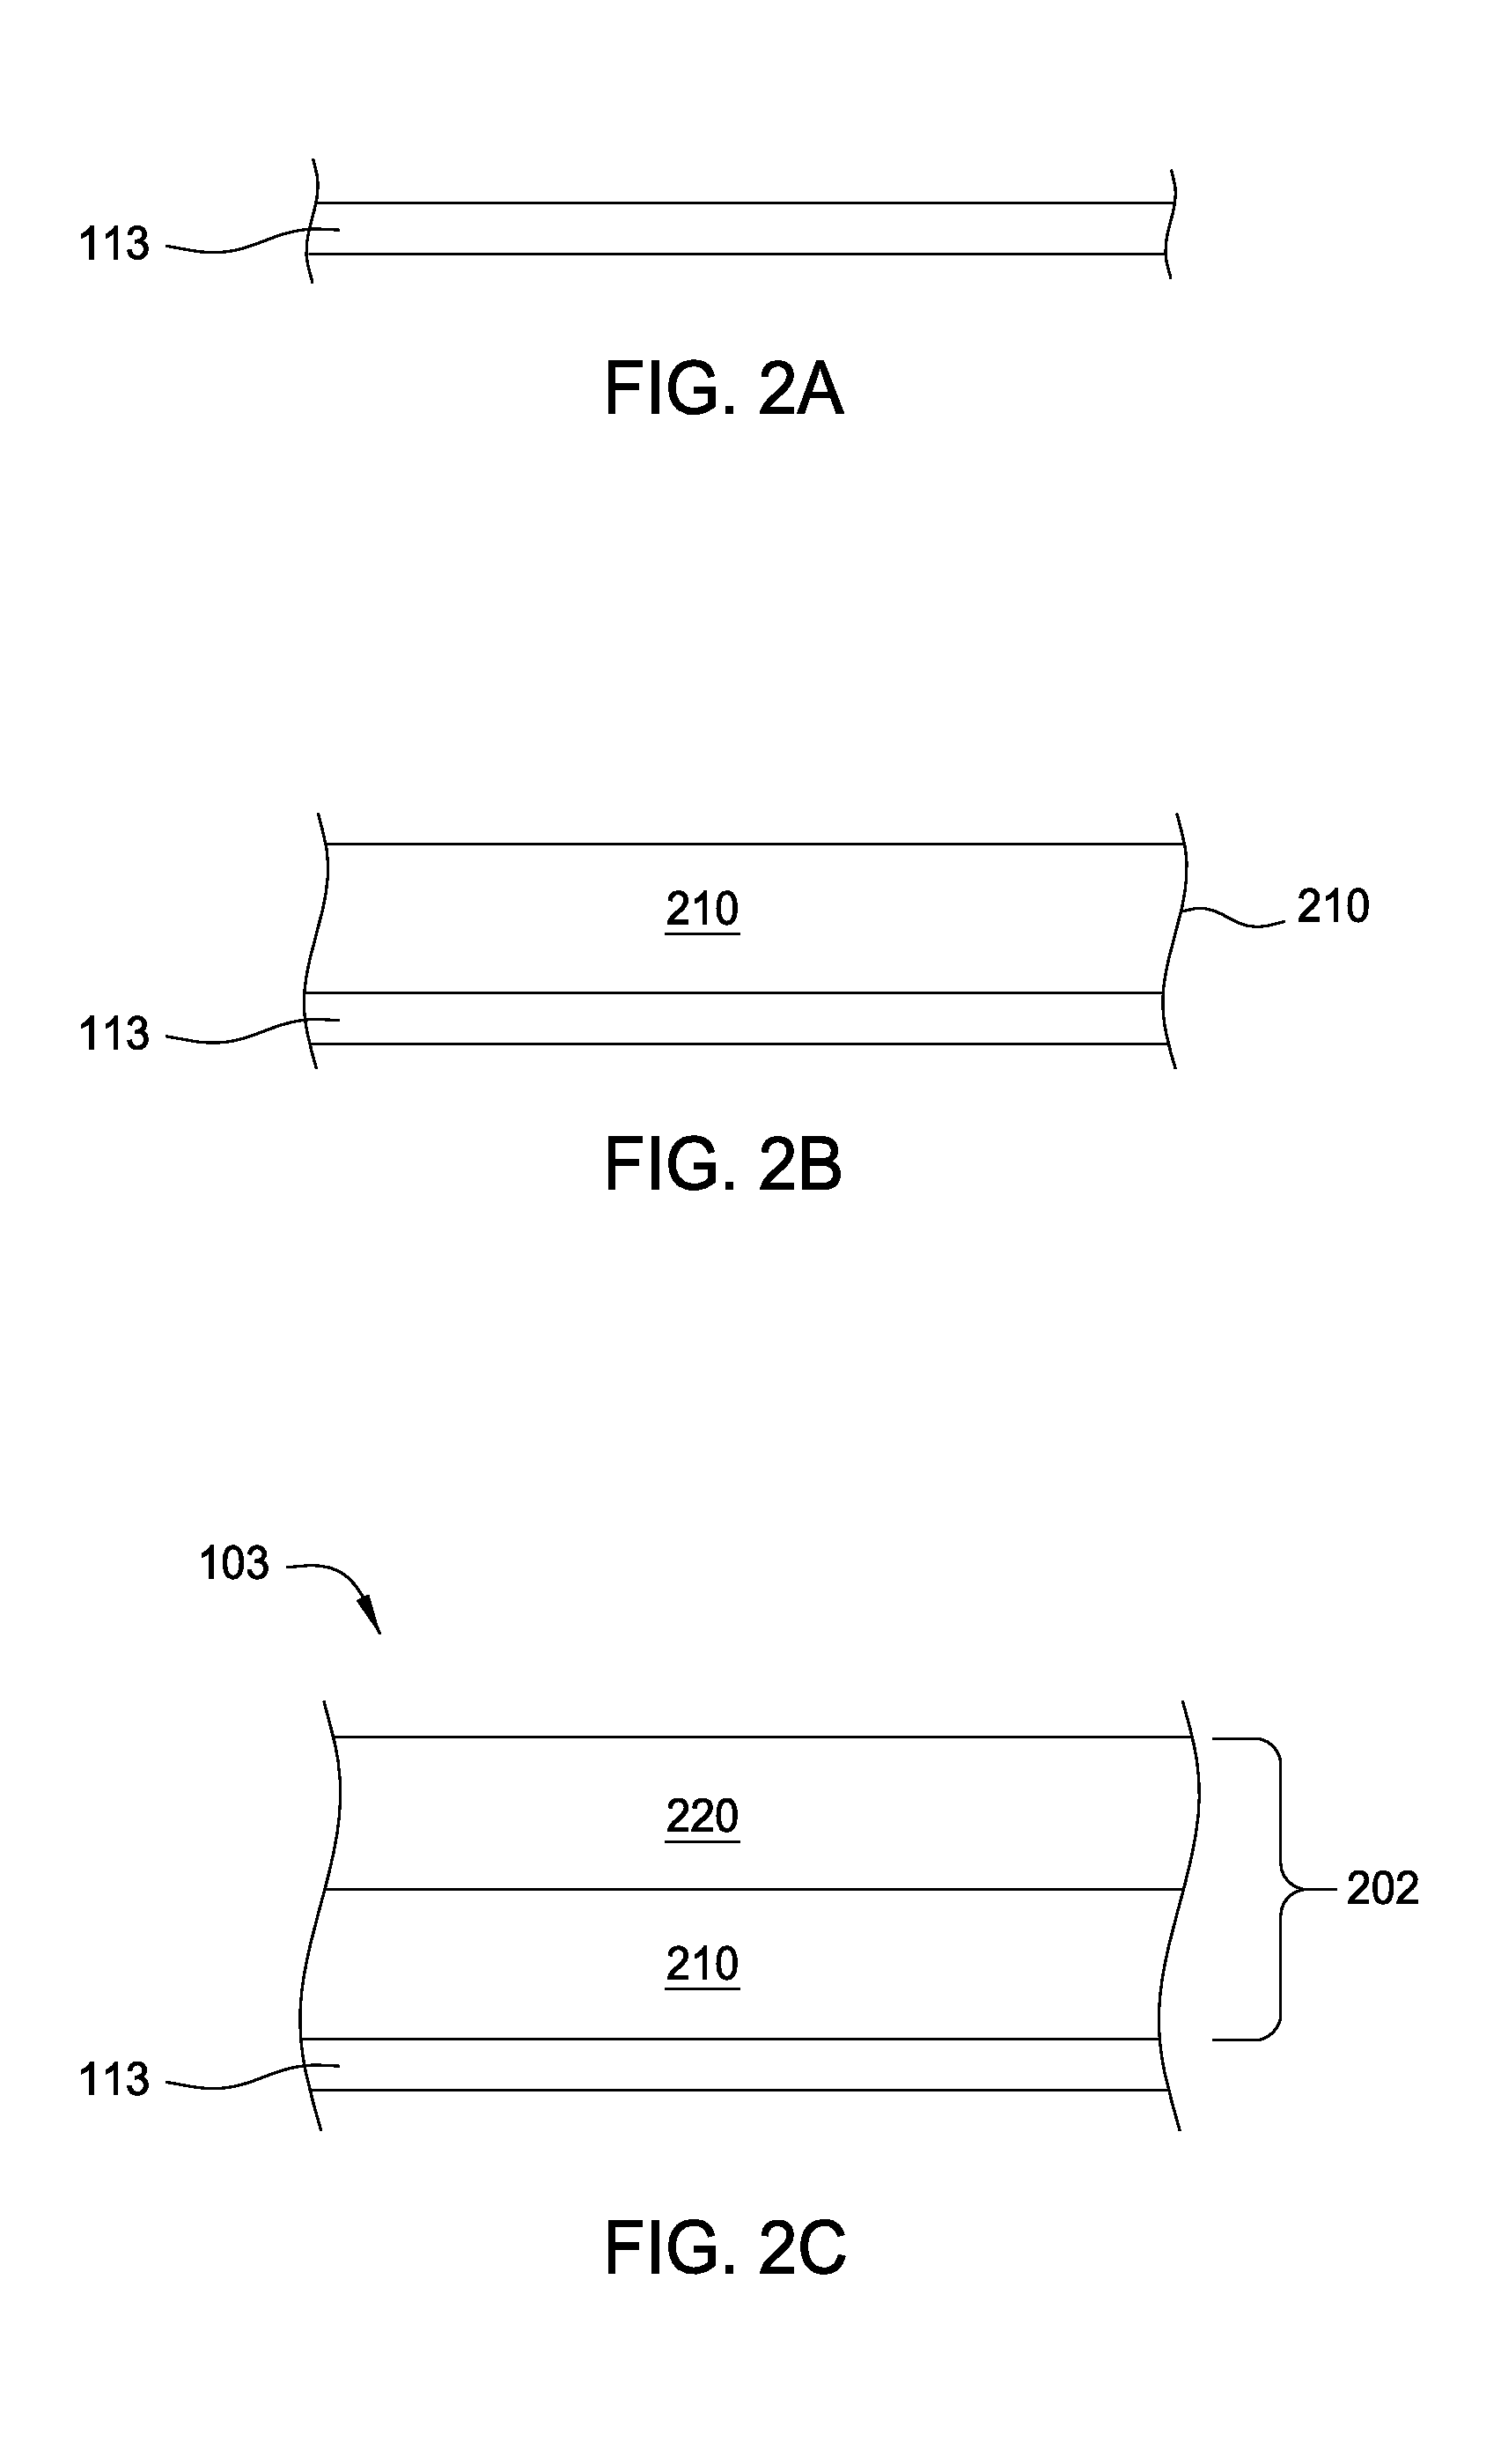 Multi-layer battery electrode design for enabling thicker electrode fabrication